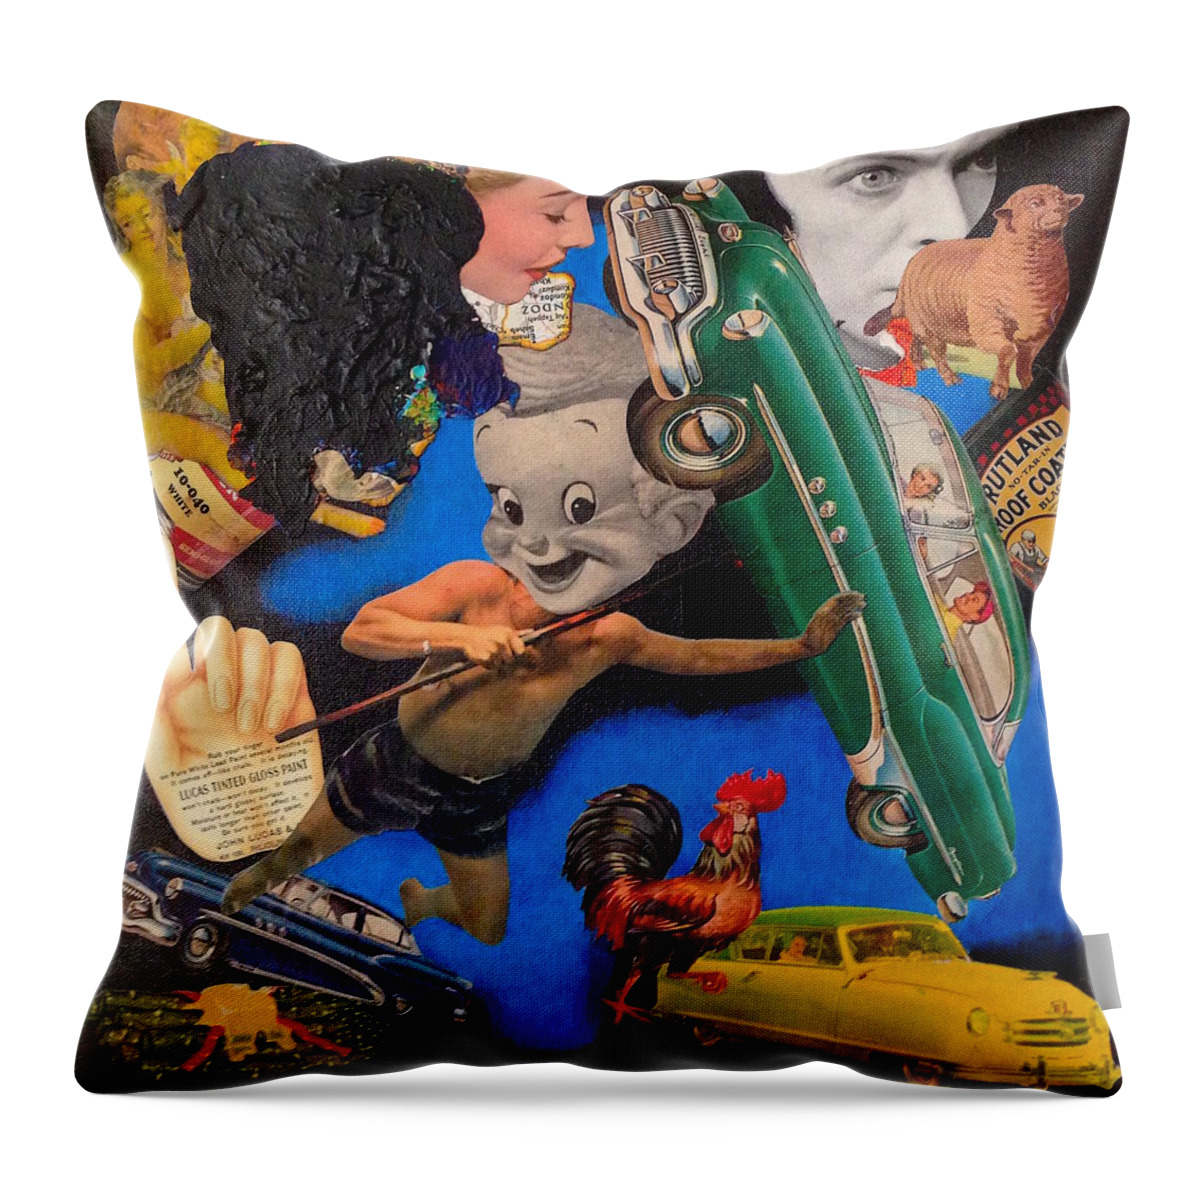  Throw Pillow featuring the mixed media Buick by Steve Fields